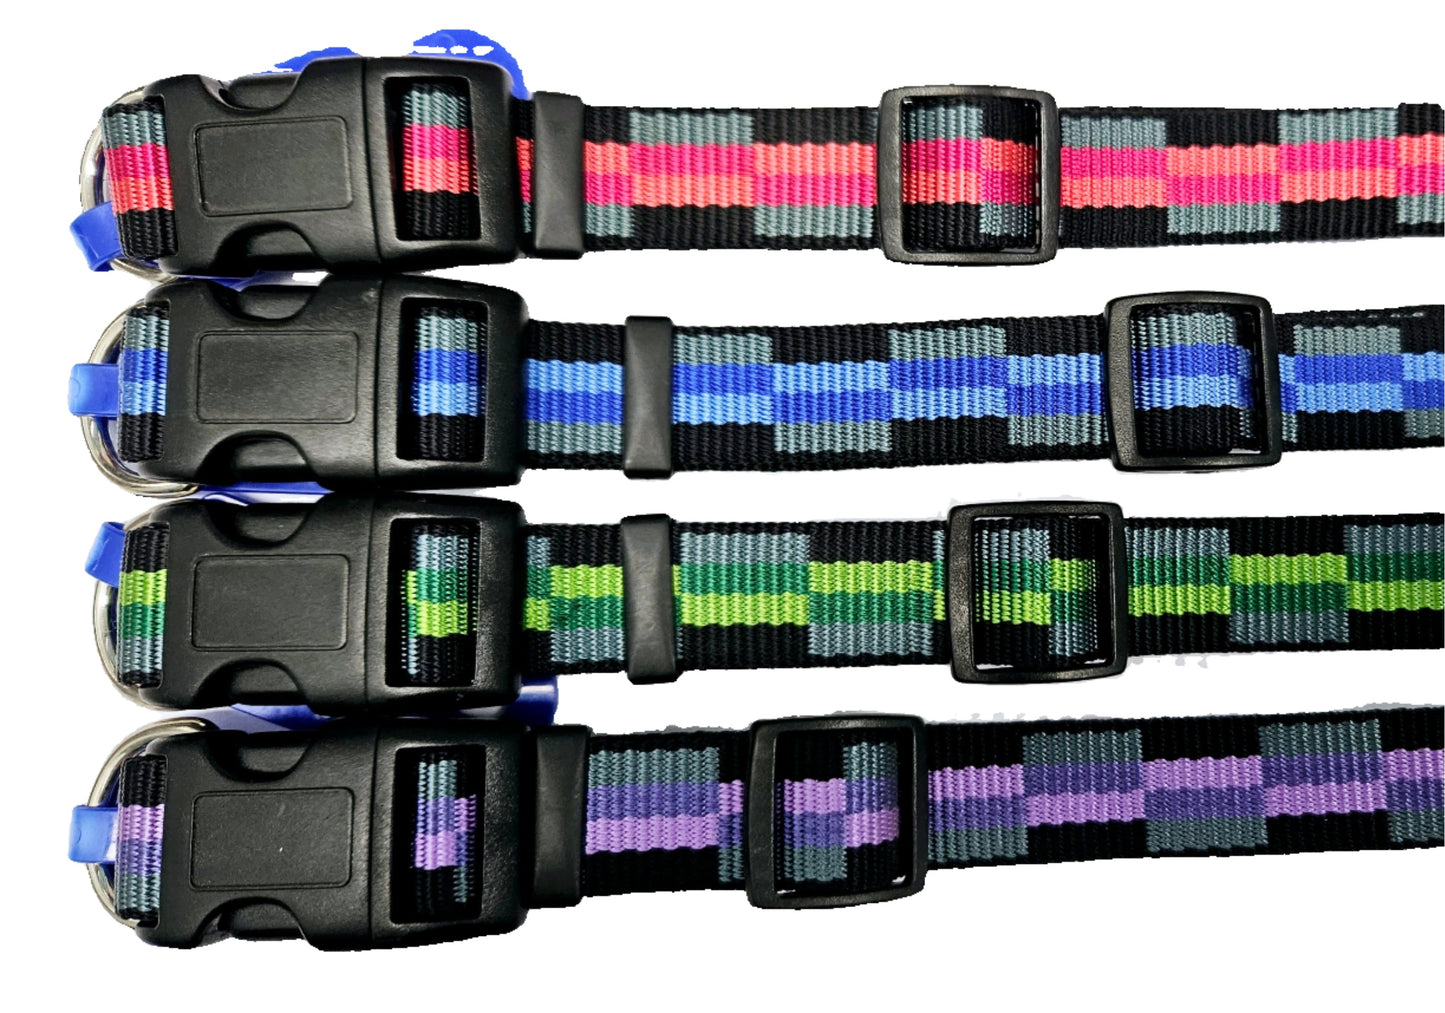 Beau Pets Dog Collar - Multi Check Design - 55-65cm - Assorted Colours - SPECIAL (ND)